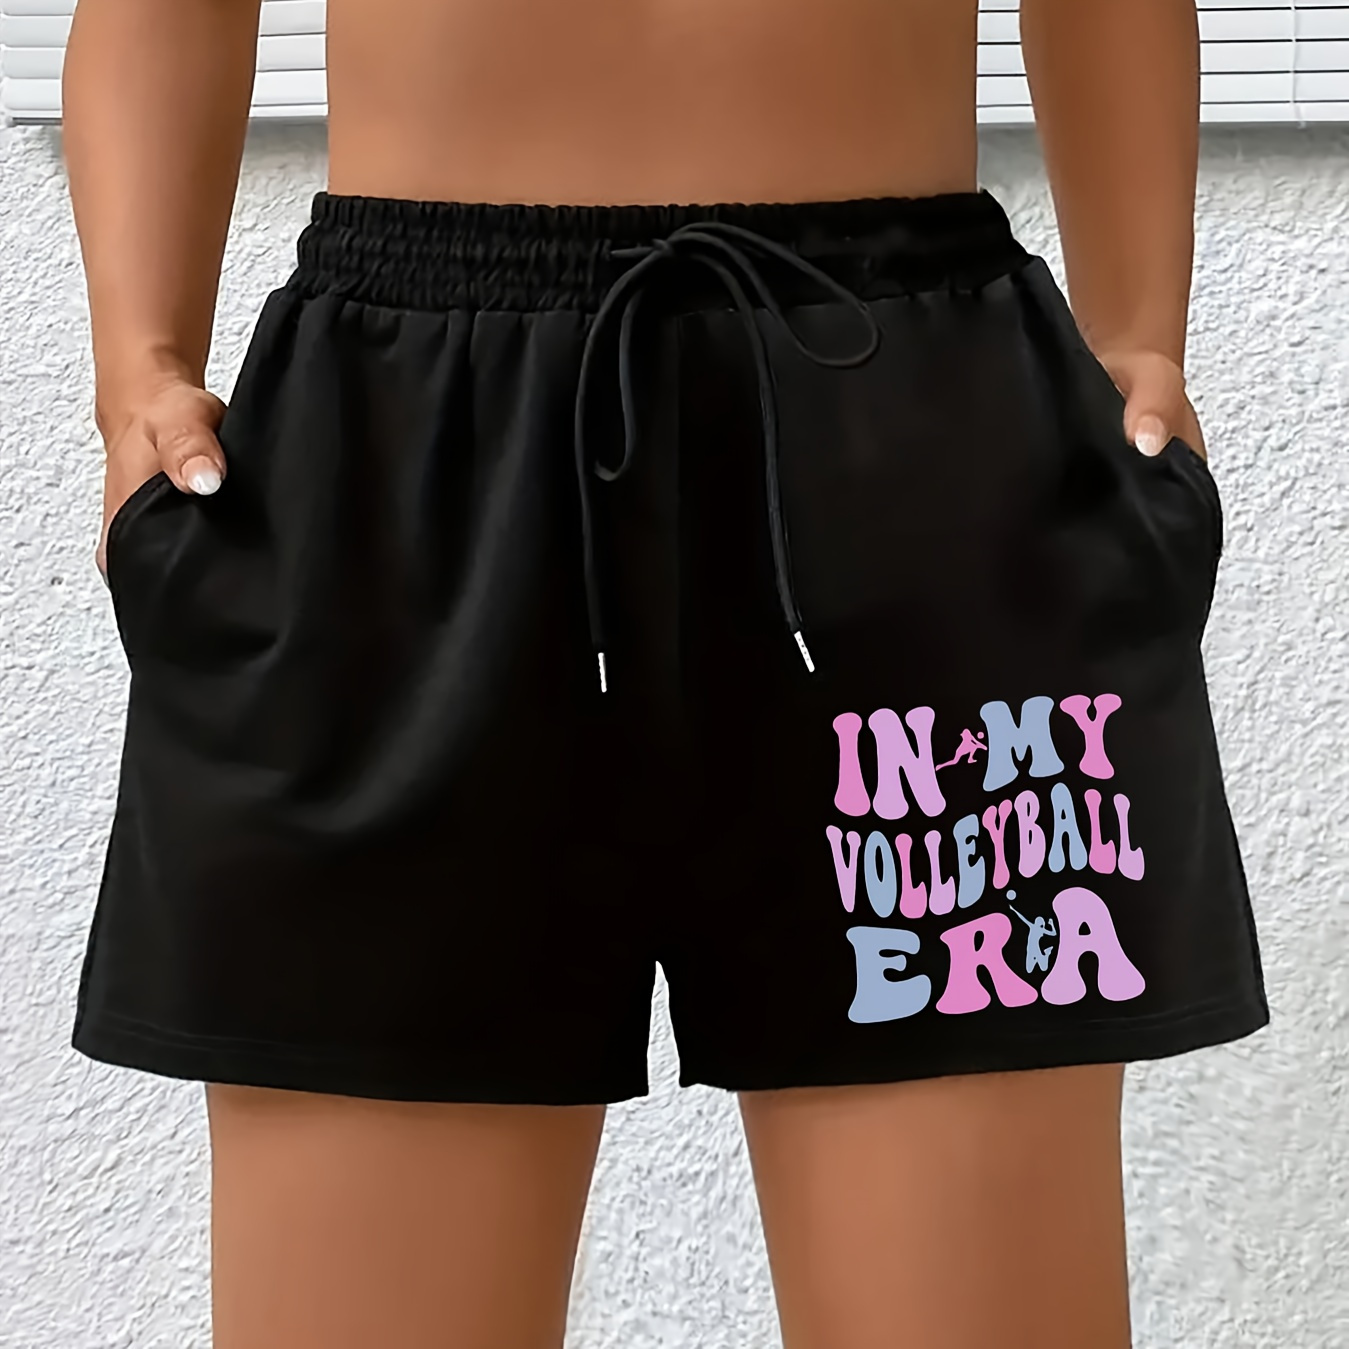 

Women's Comfortable Casual Athletic Breathable Quick-dry Shorts, "in My Volleyball Era" Print, Elastic Waist With Drawstring